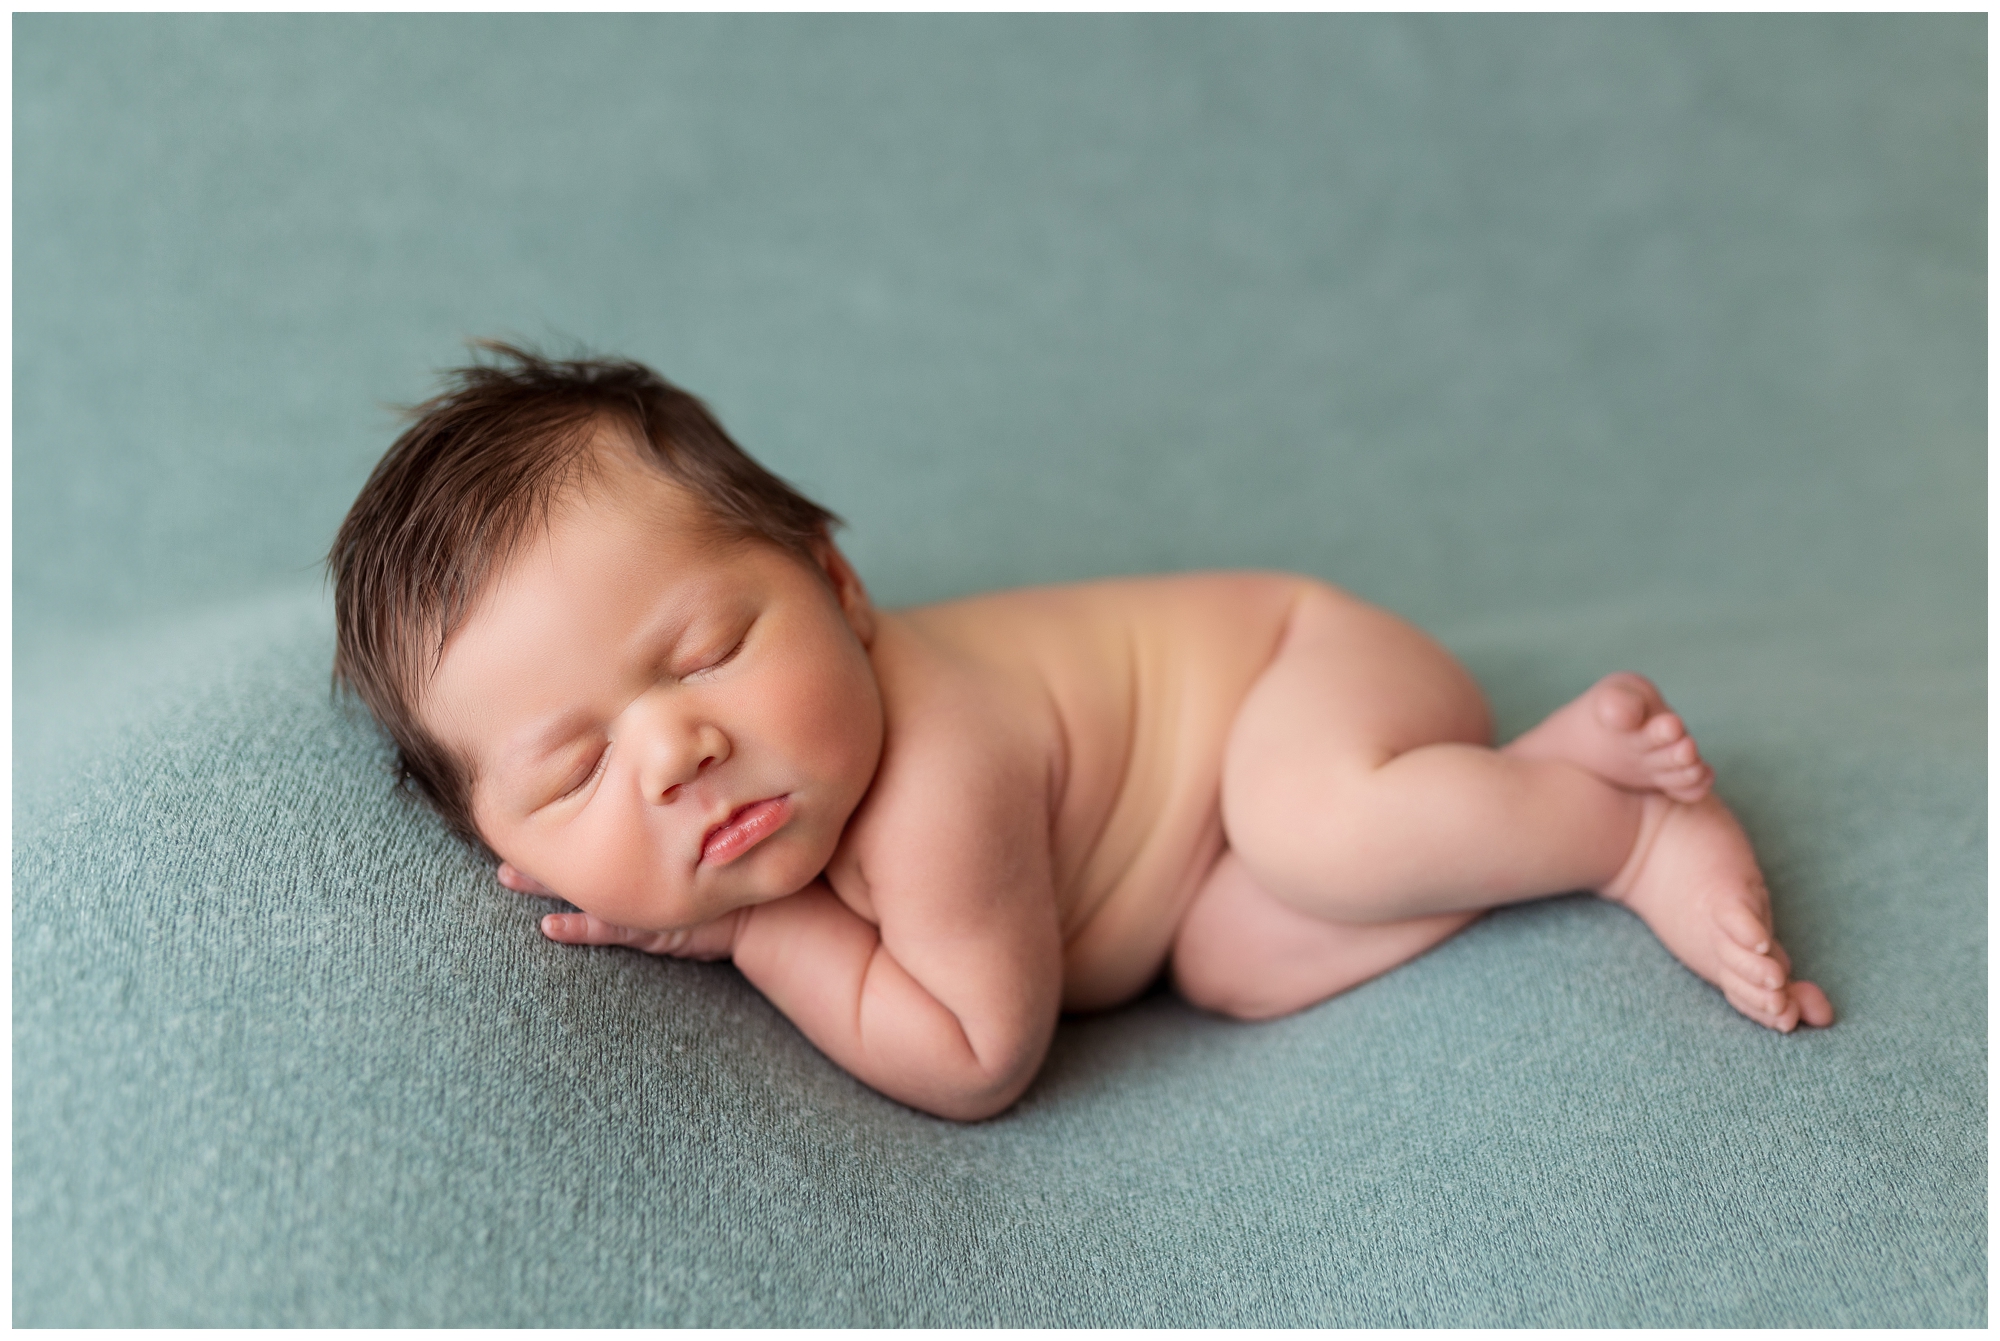 posed newborn boy on a teal blanket with lots of hair